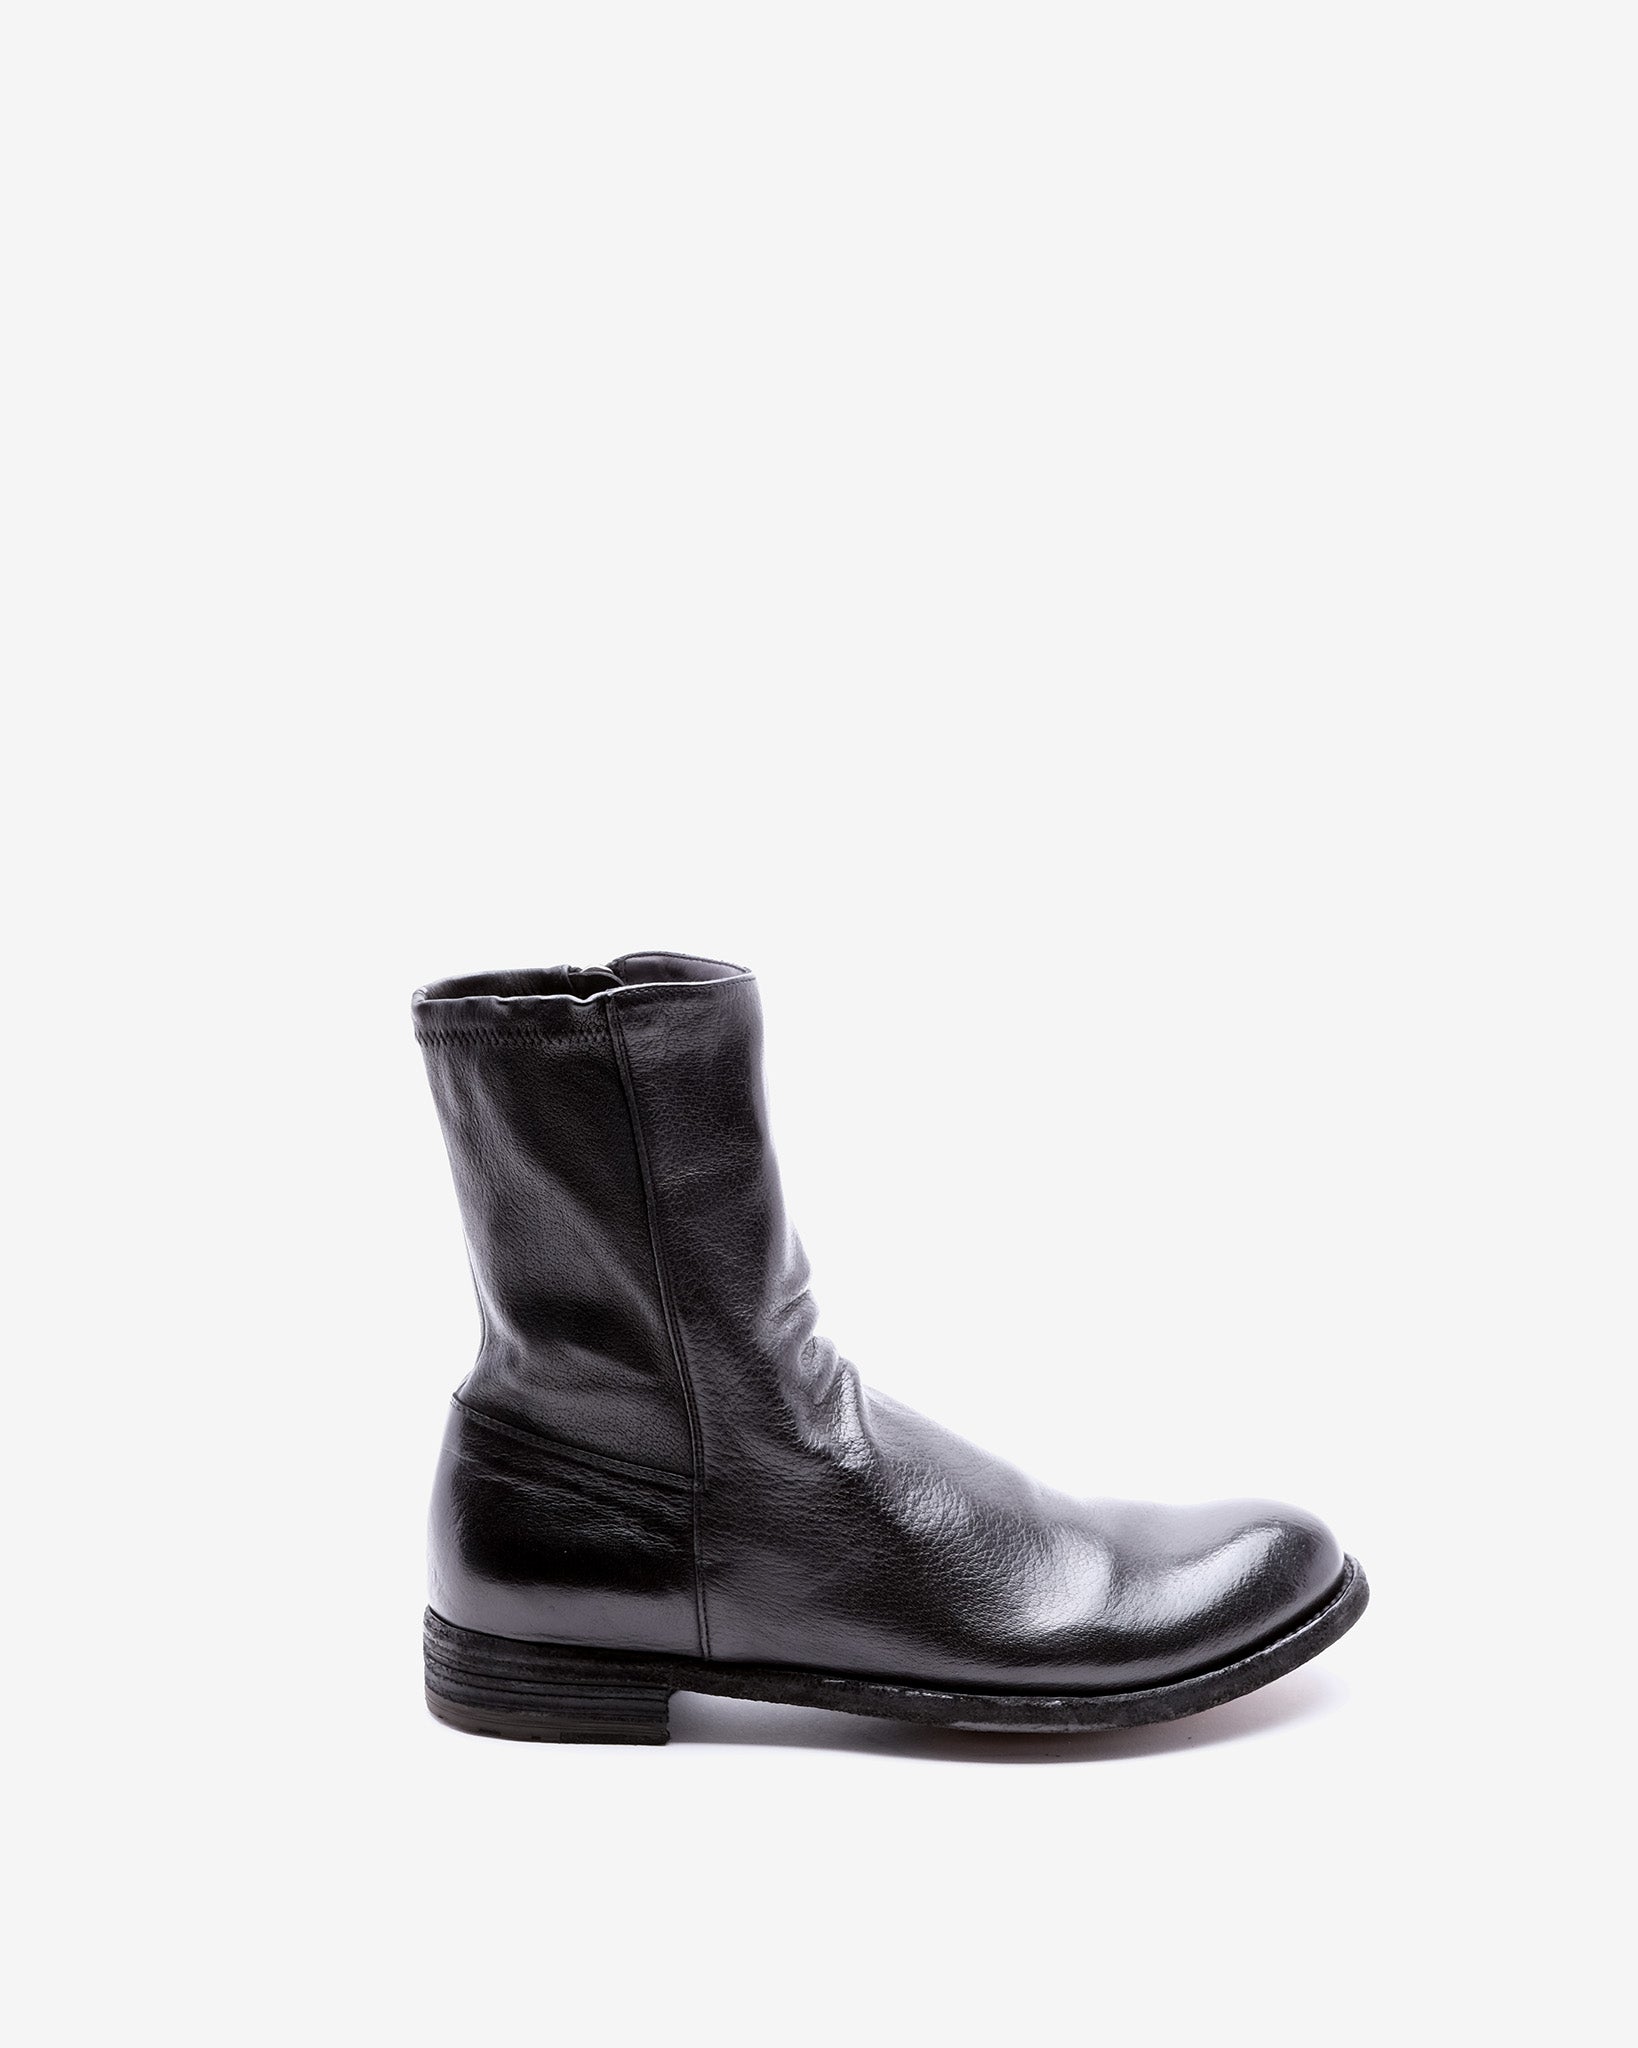 Lexikon 135 Ignis Stretch T. Nero Leather Boots